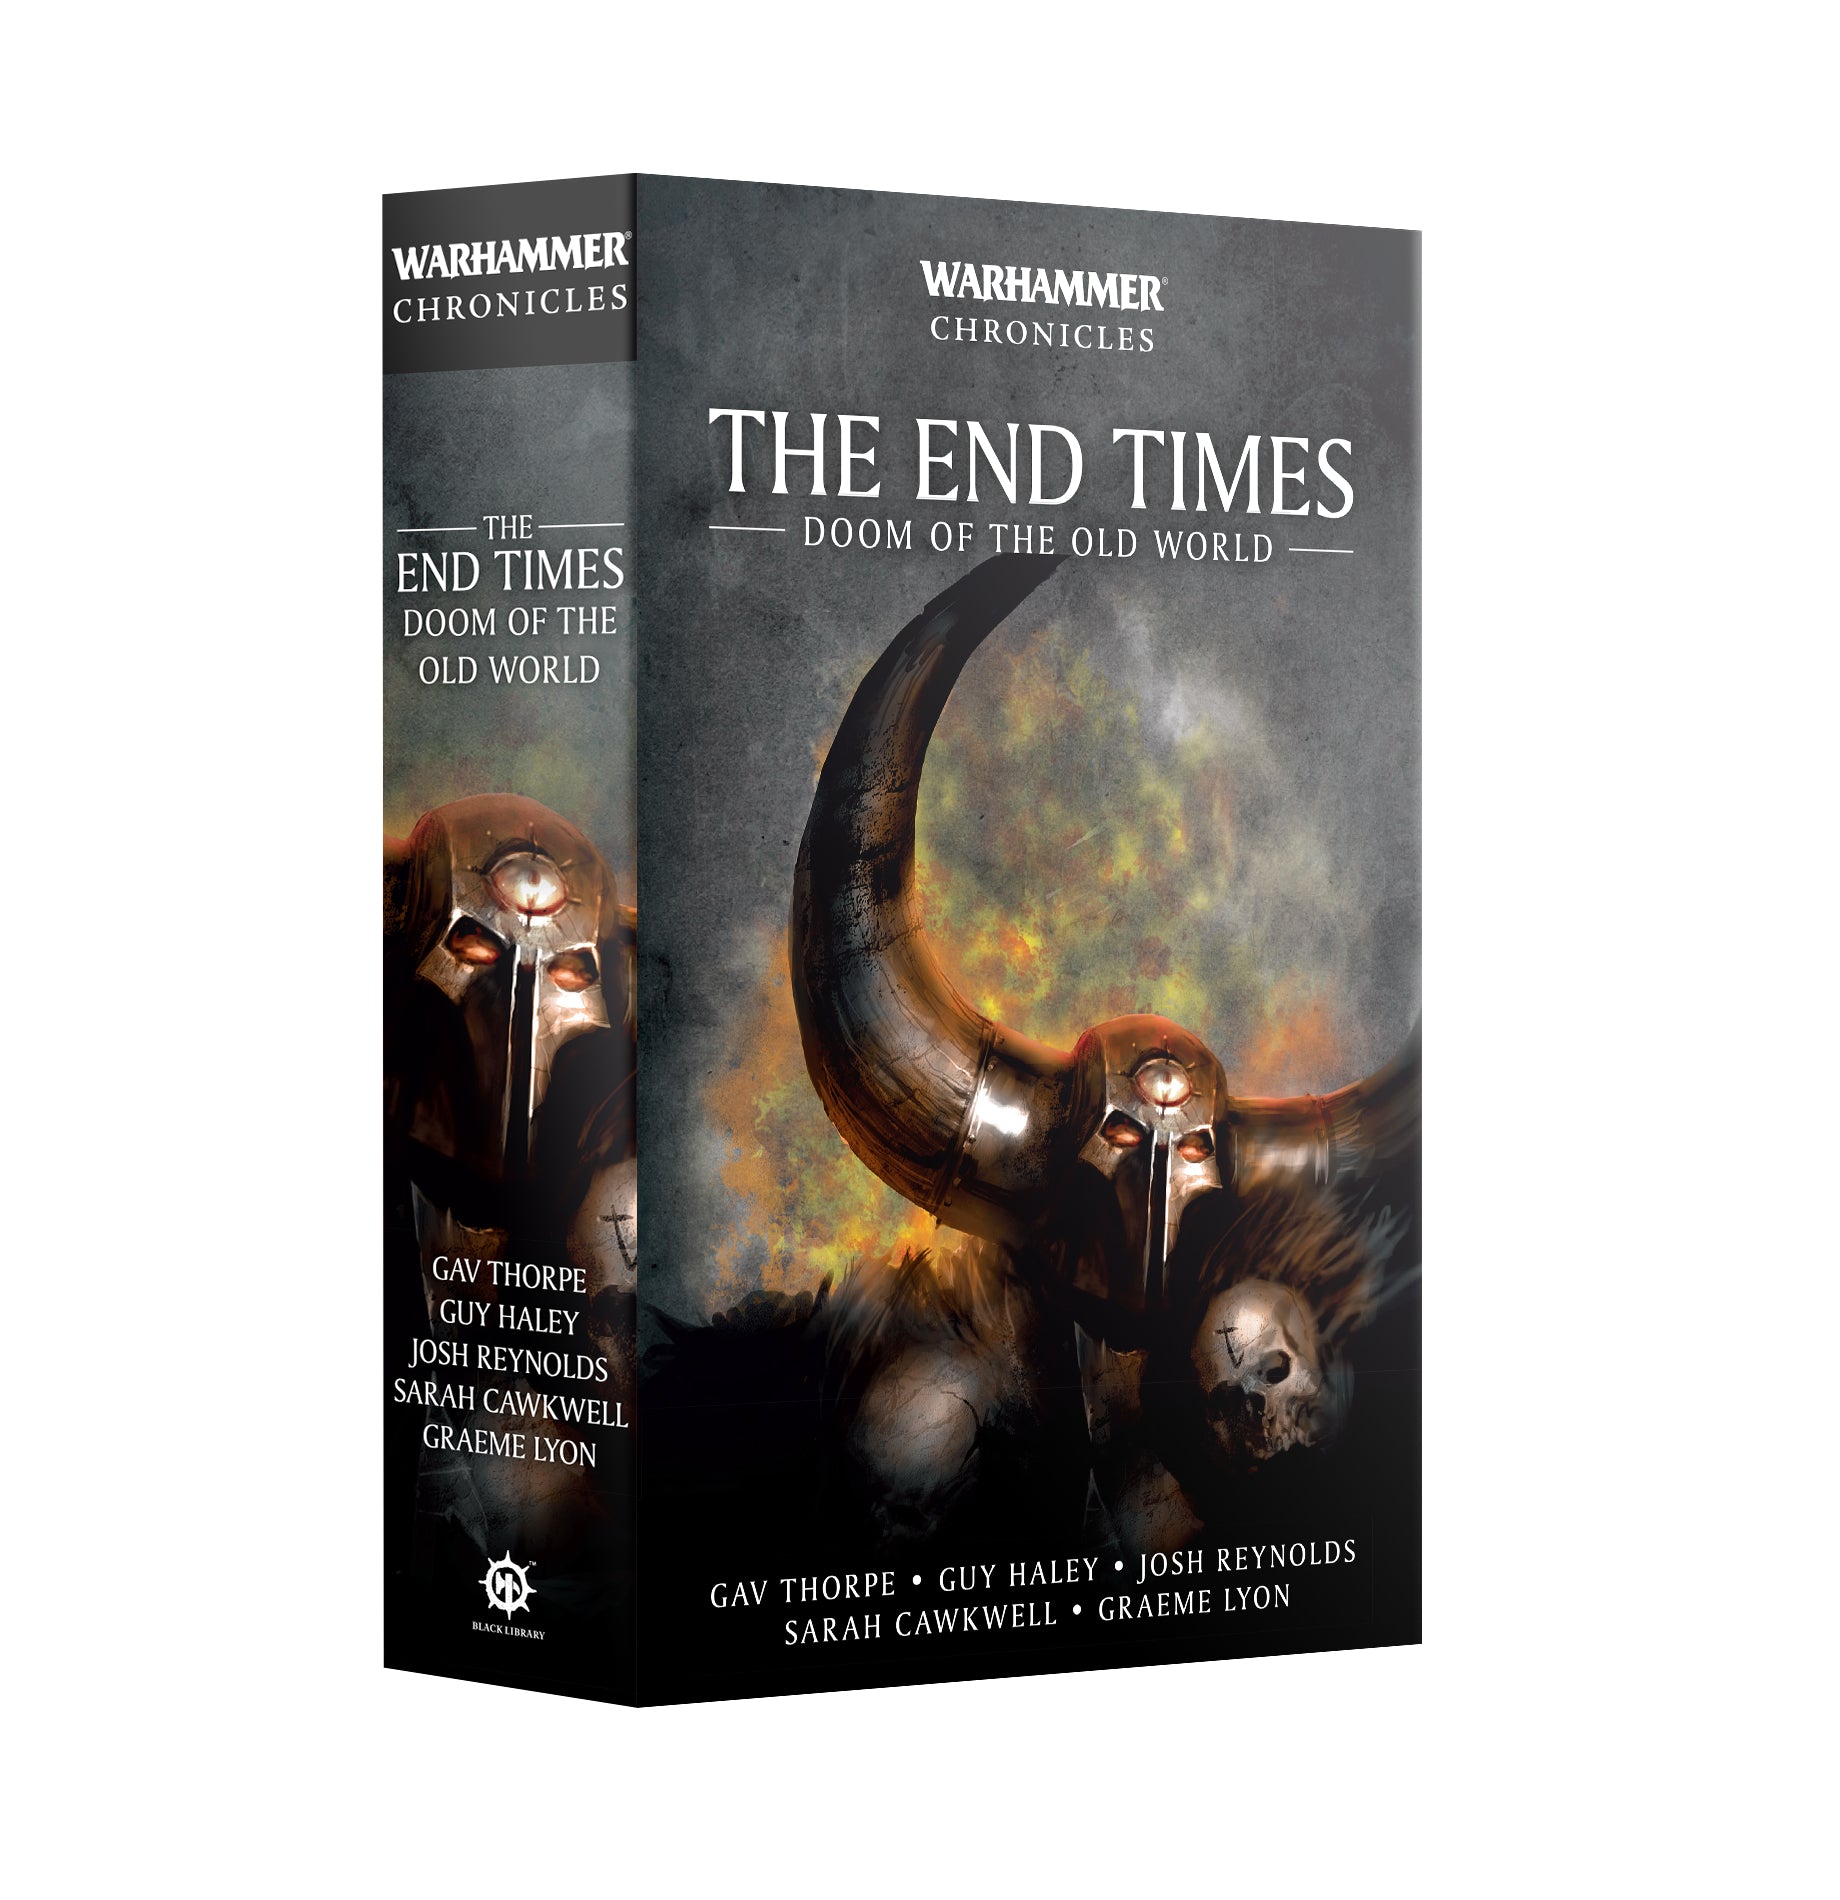 THE END TIMES: DOOM OF THE OLD WORLD | Gopher Games